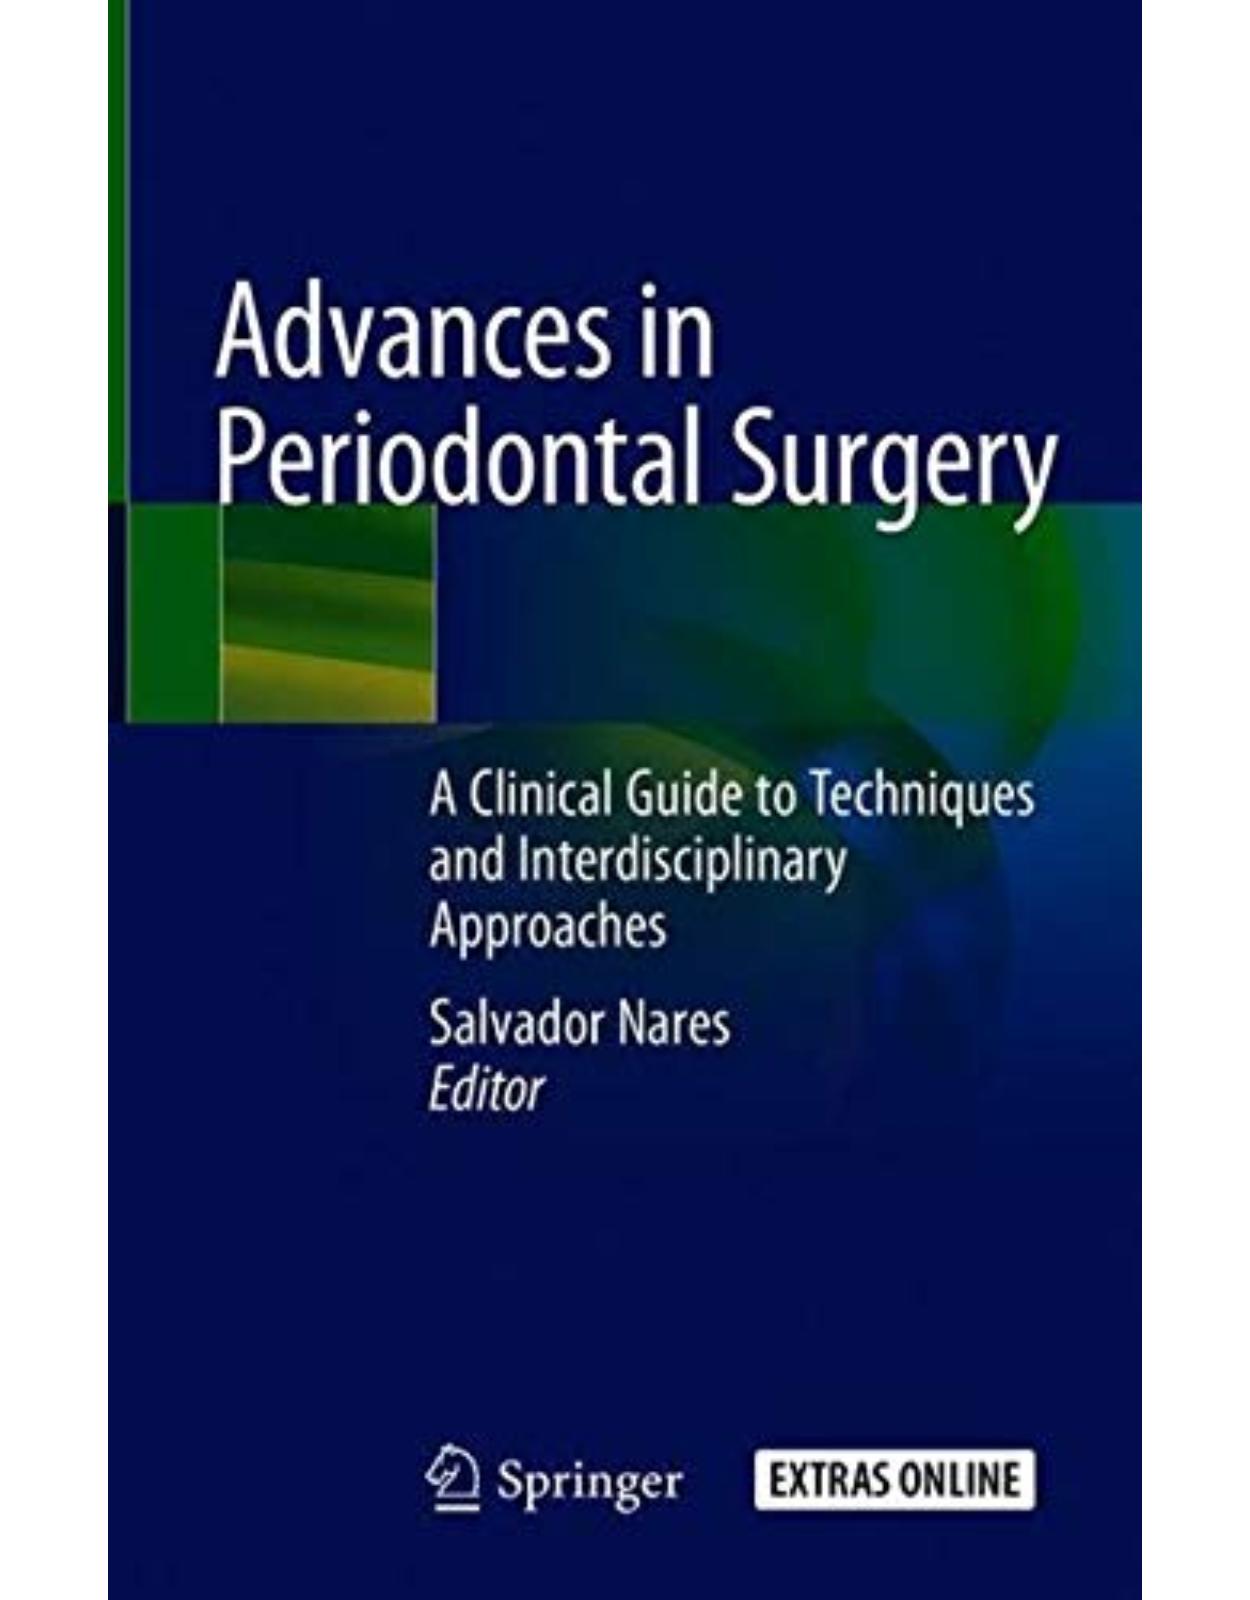 Advances in Periodontal Surgery. A Clinical Guide to Techniques and Interdisciplinary Approaches